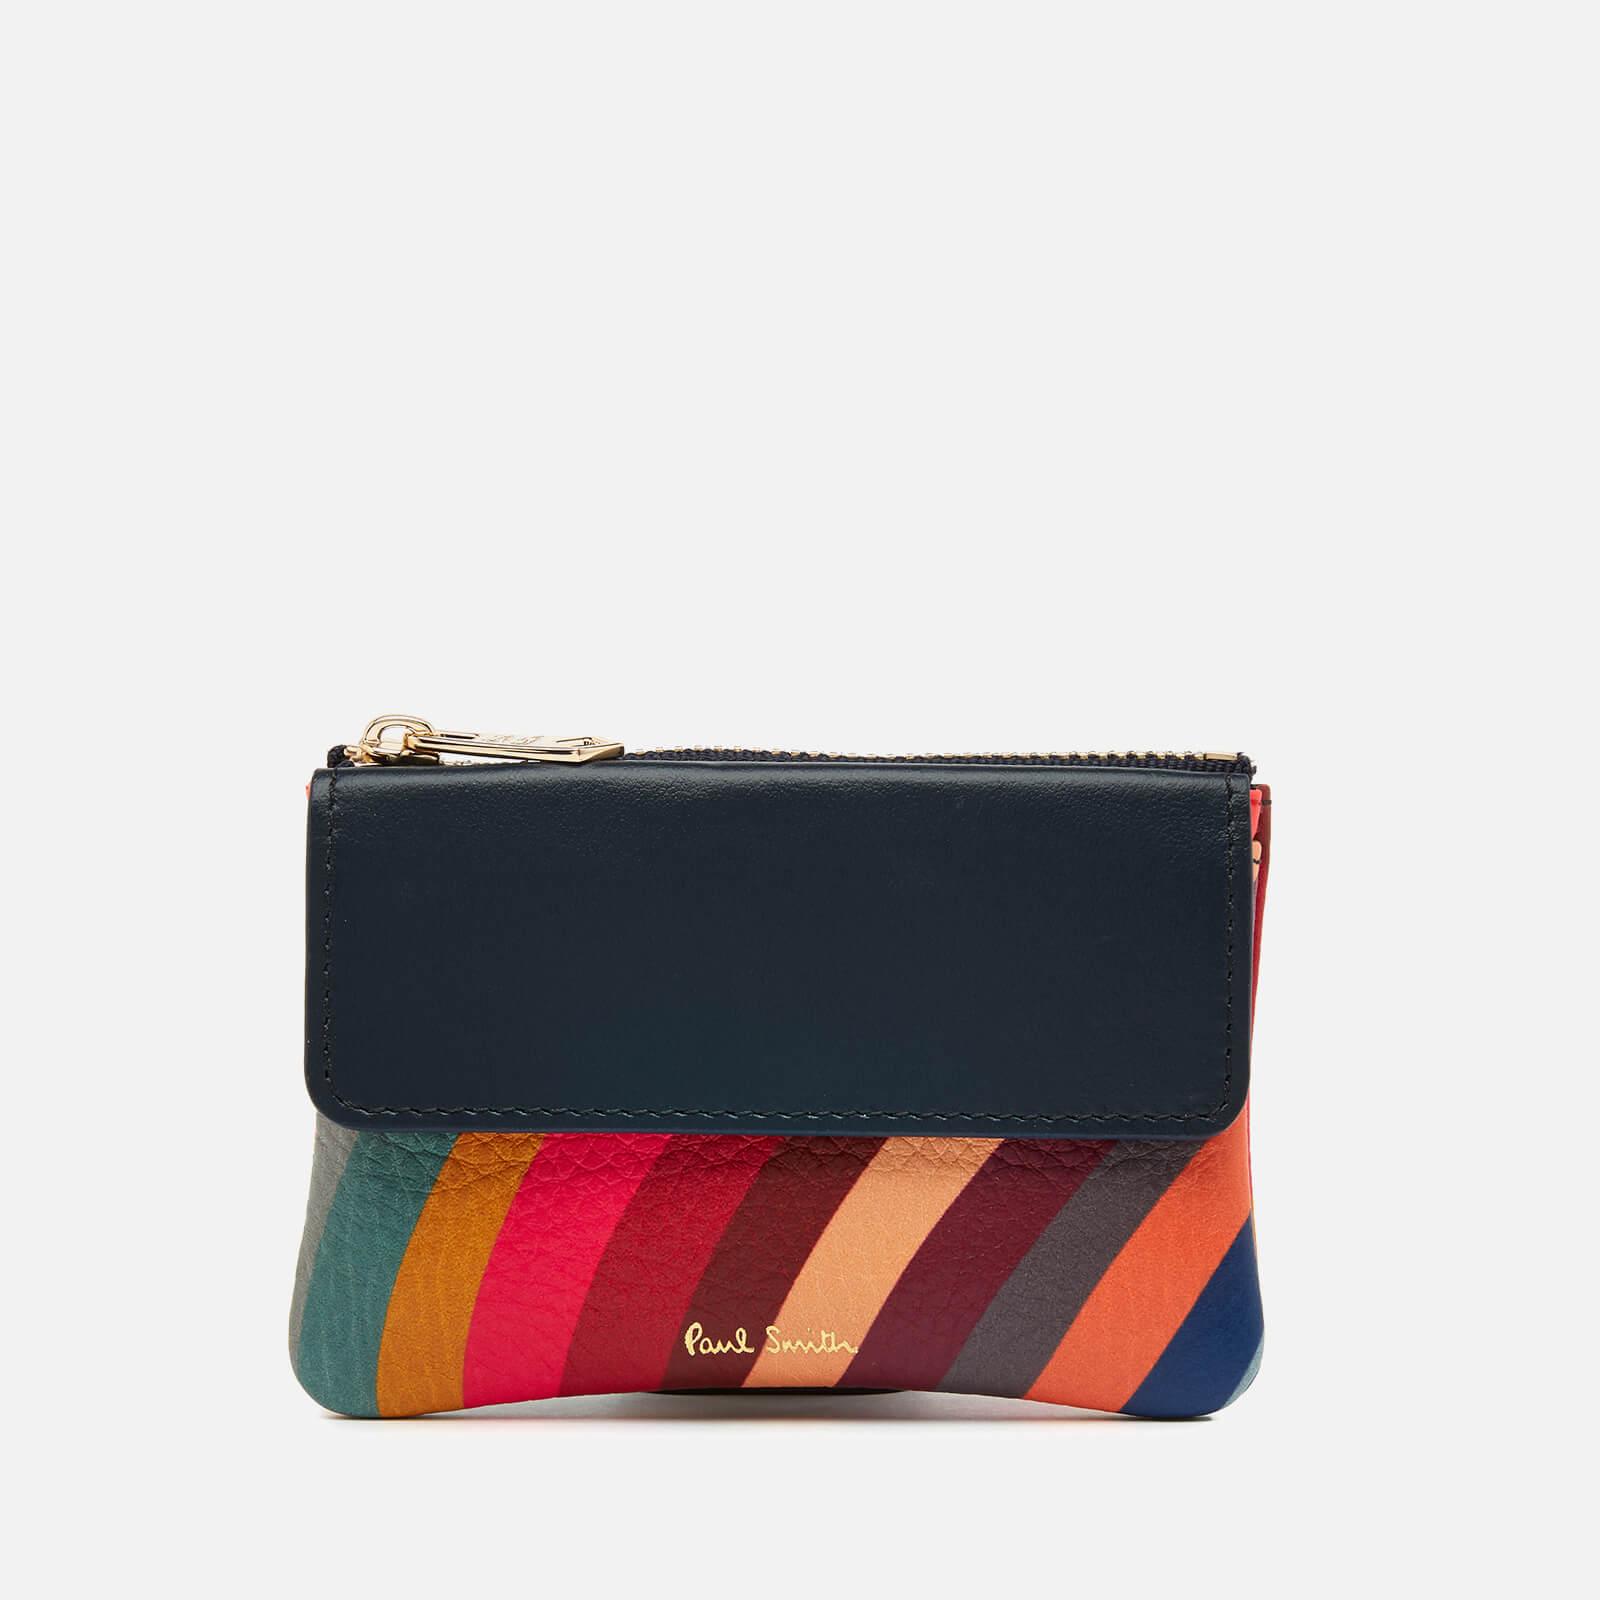 Paul Smith Small Zip Pouch Purse | Lyst